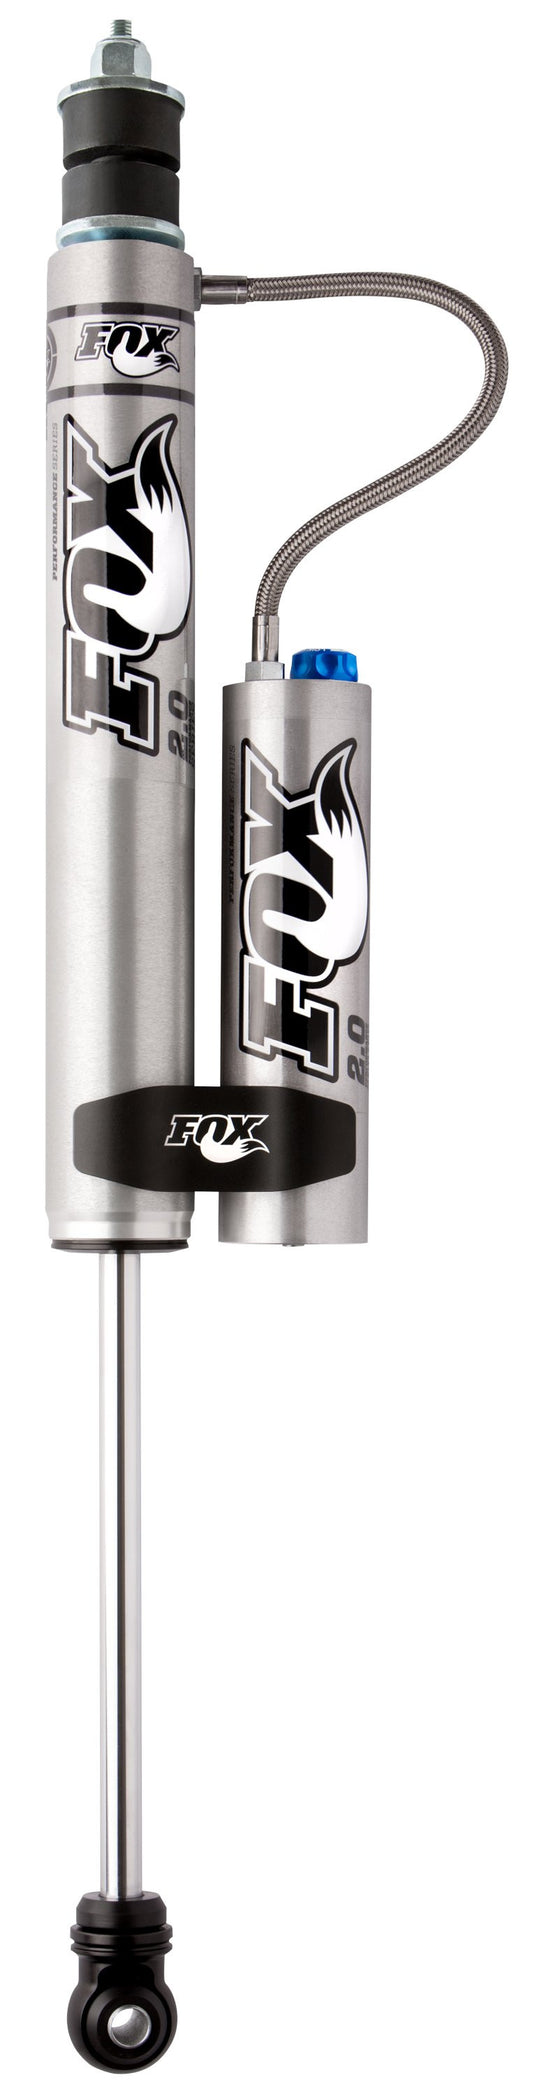 PERFORMANCE SERIES 2.0 SMOOTH BODY RESERVOIR SHOCK - ADJUSTABLE Lift: 4.5-5.5 2005-2016 Ford F-450 Super Duty FOX-985-26-104 - 2.0 SHOCK - FOX Offroad Shocks - Texas Complete Truck Center